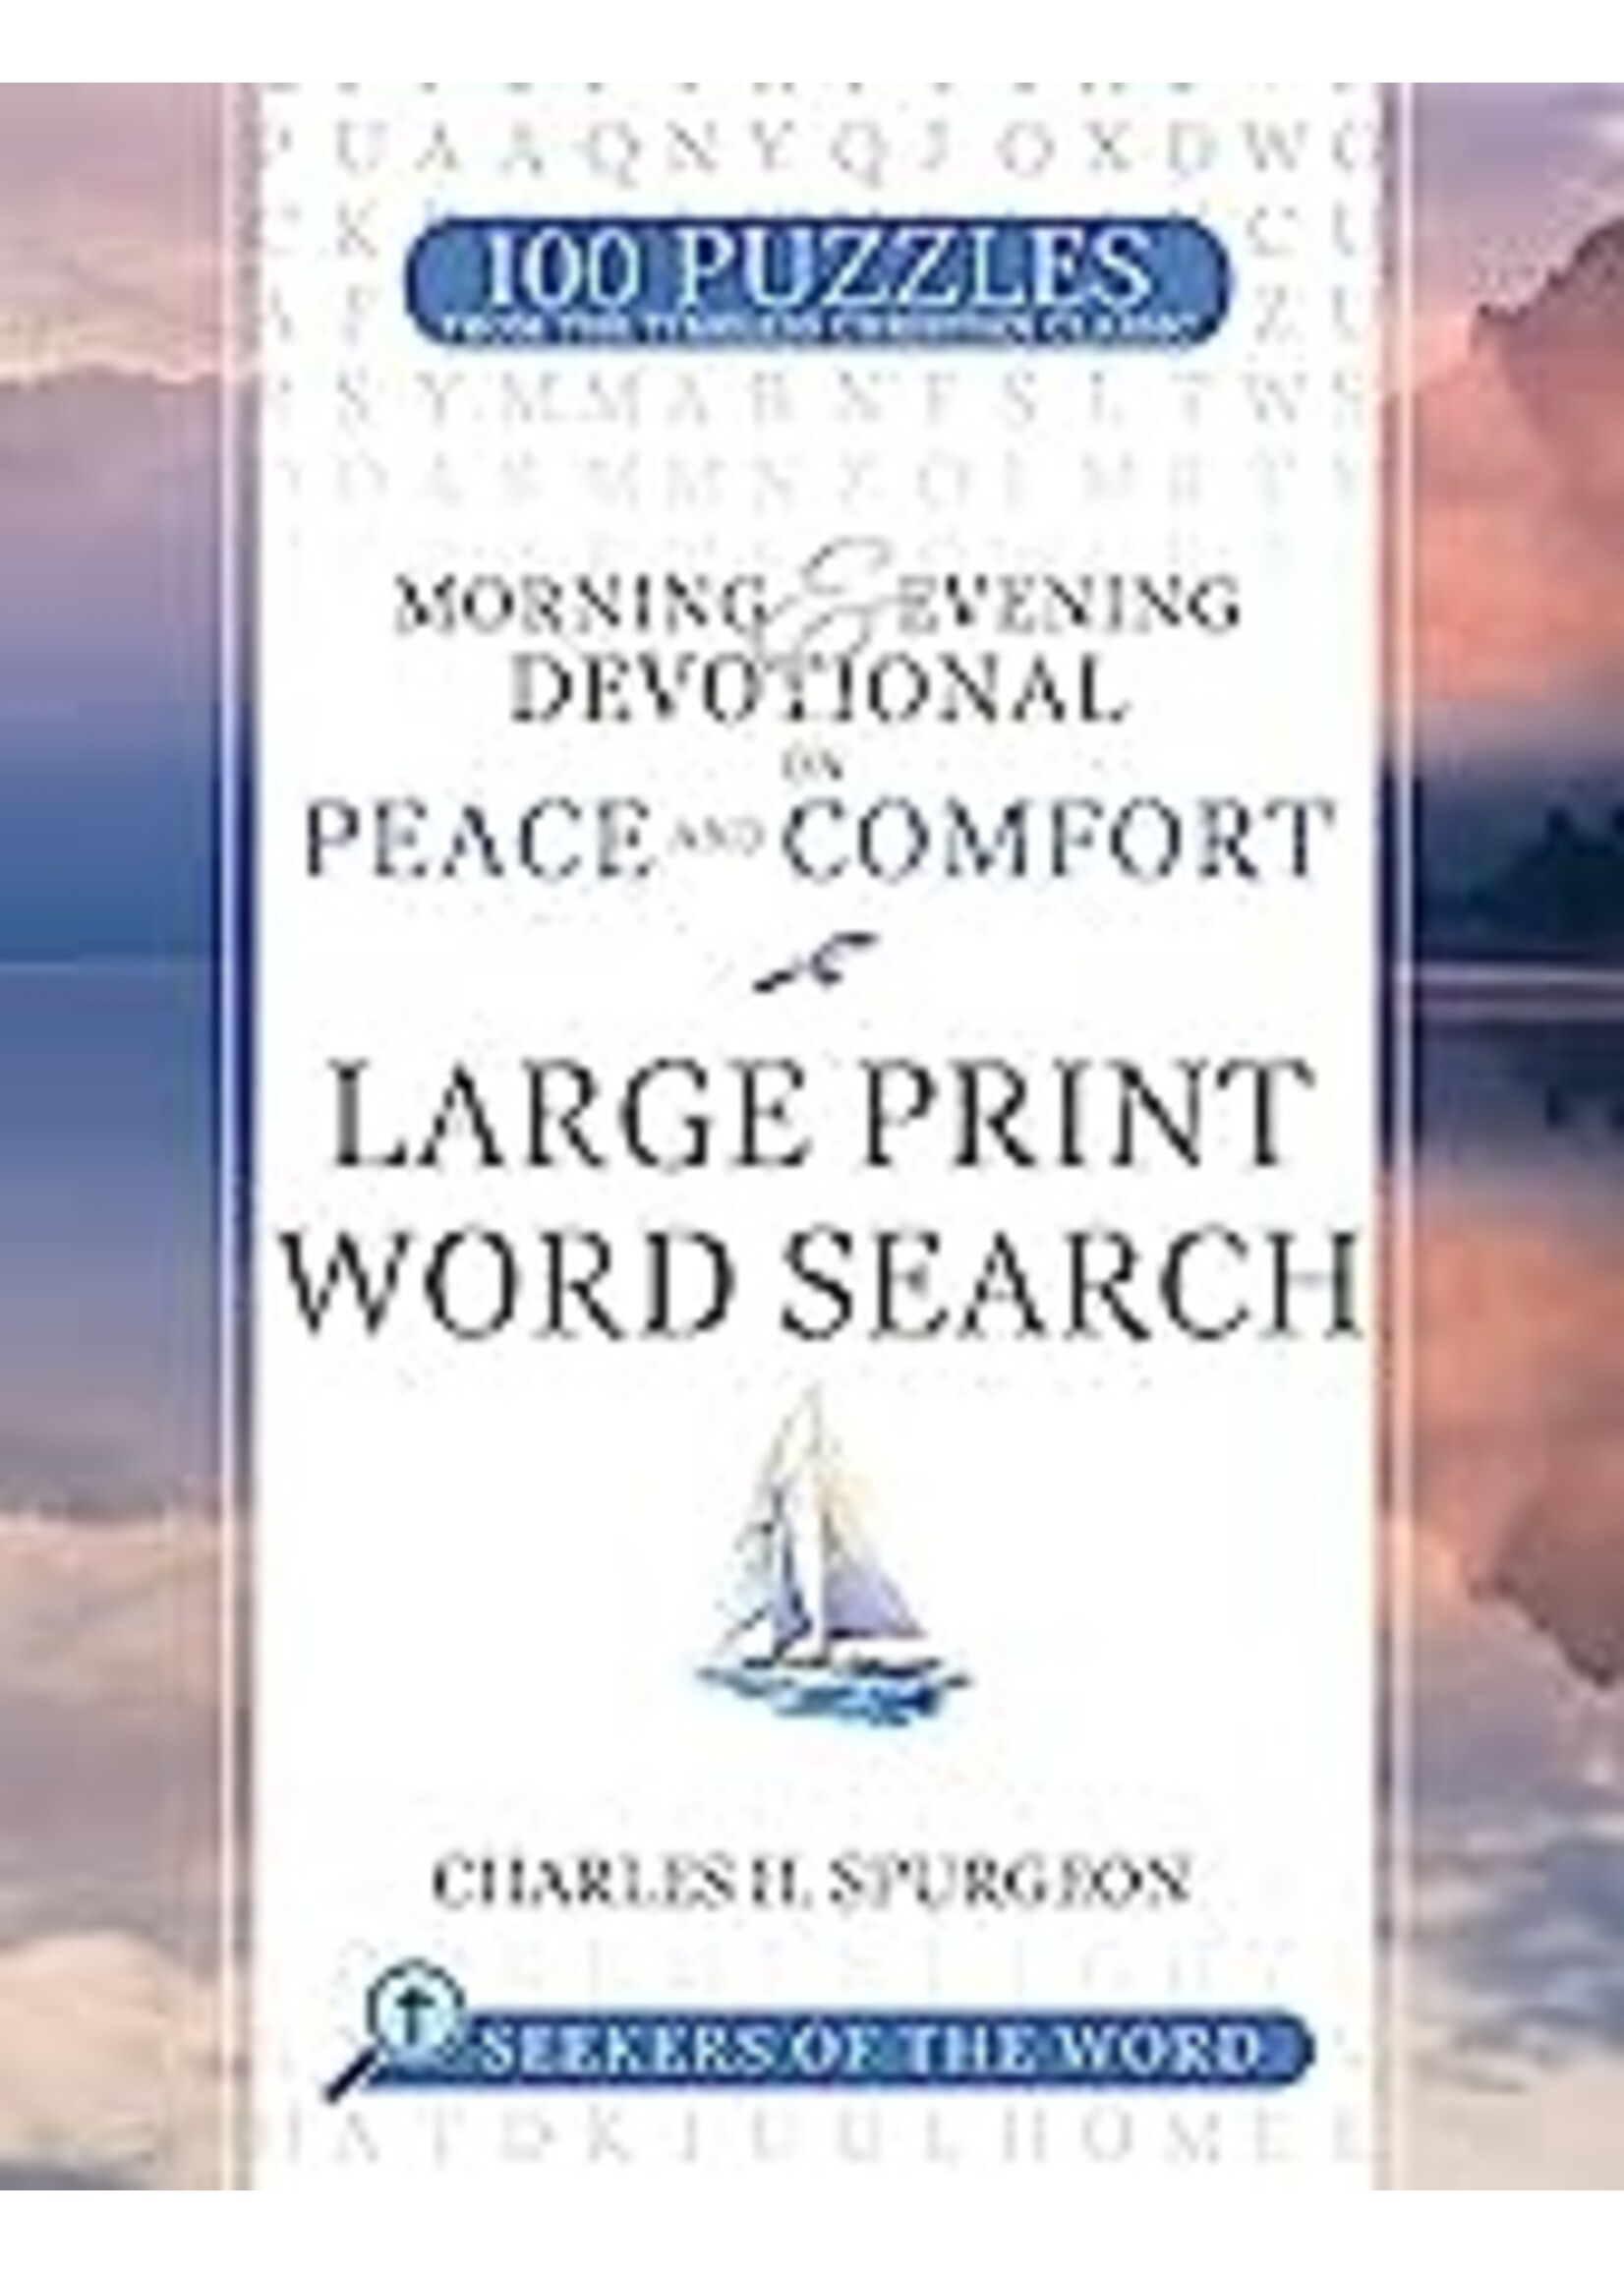 Morning and Evening Devotional on Peace and Comfort